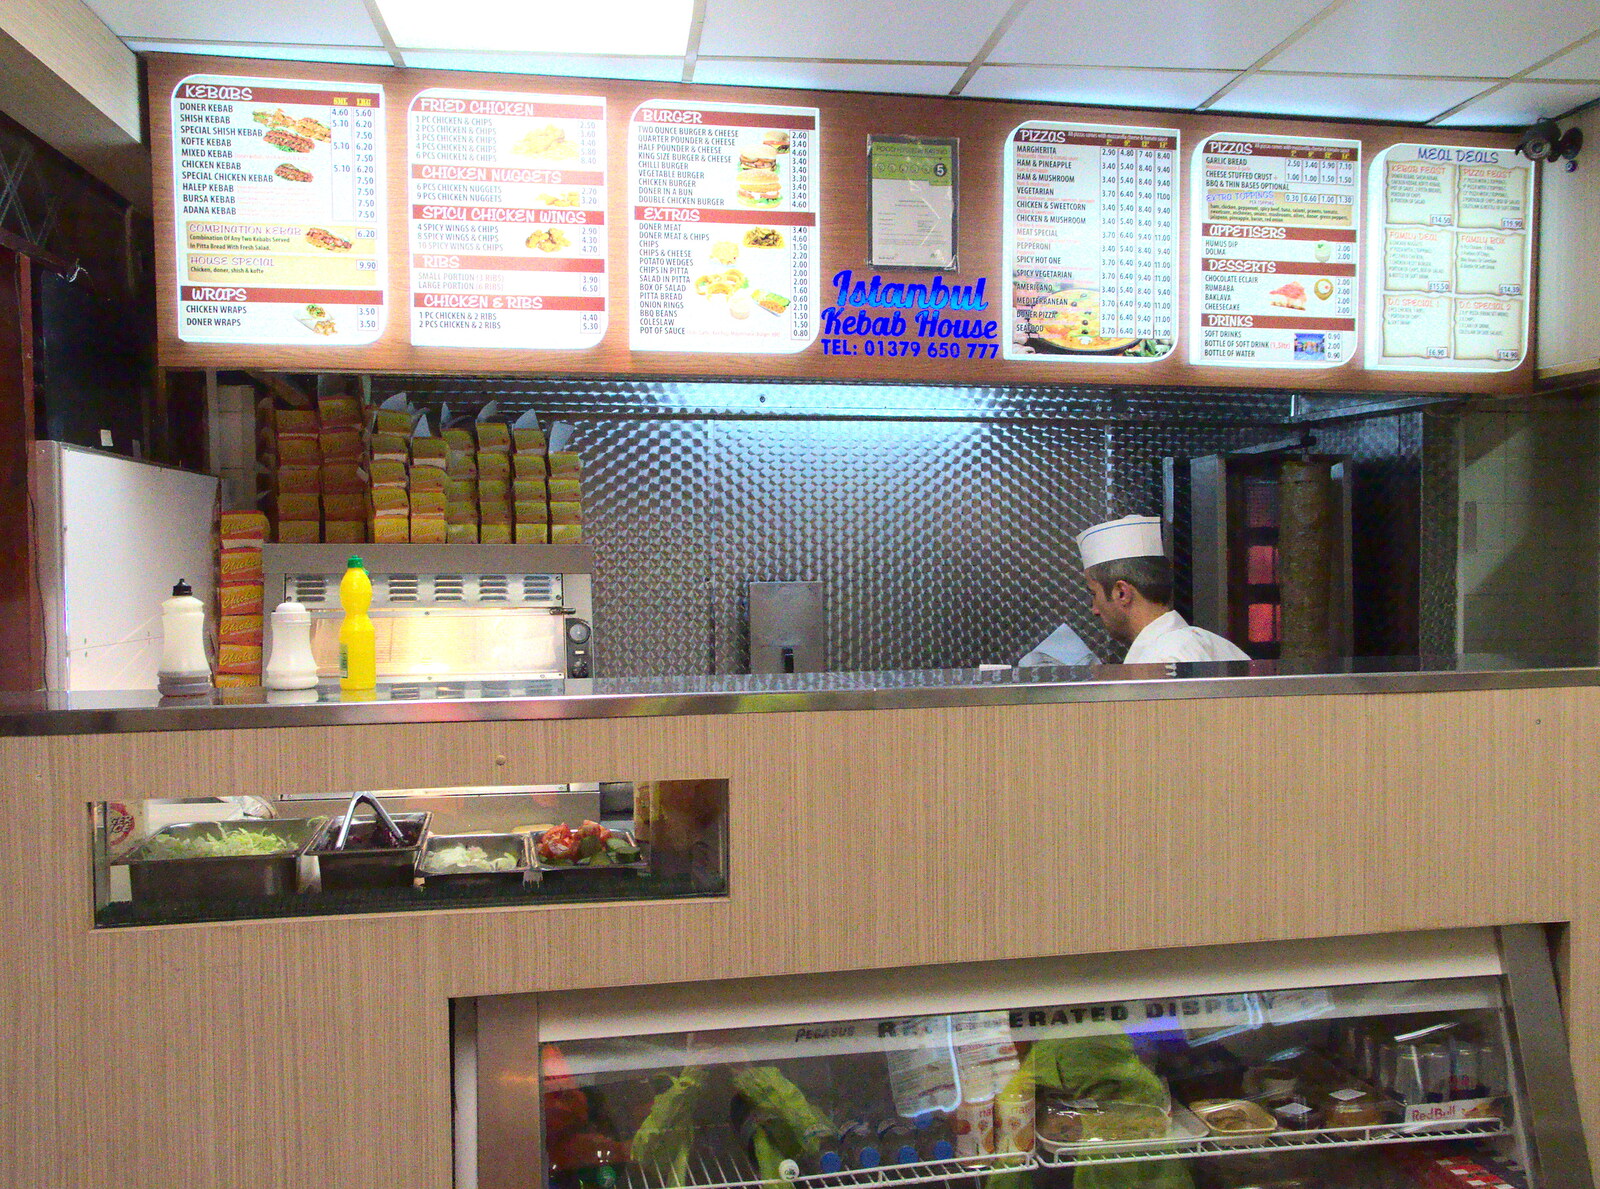 The kebab-shop dude behind the counter from Diss Kebabs and Pizza Express, Ipswich, Suffolk - 7th May 2015